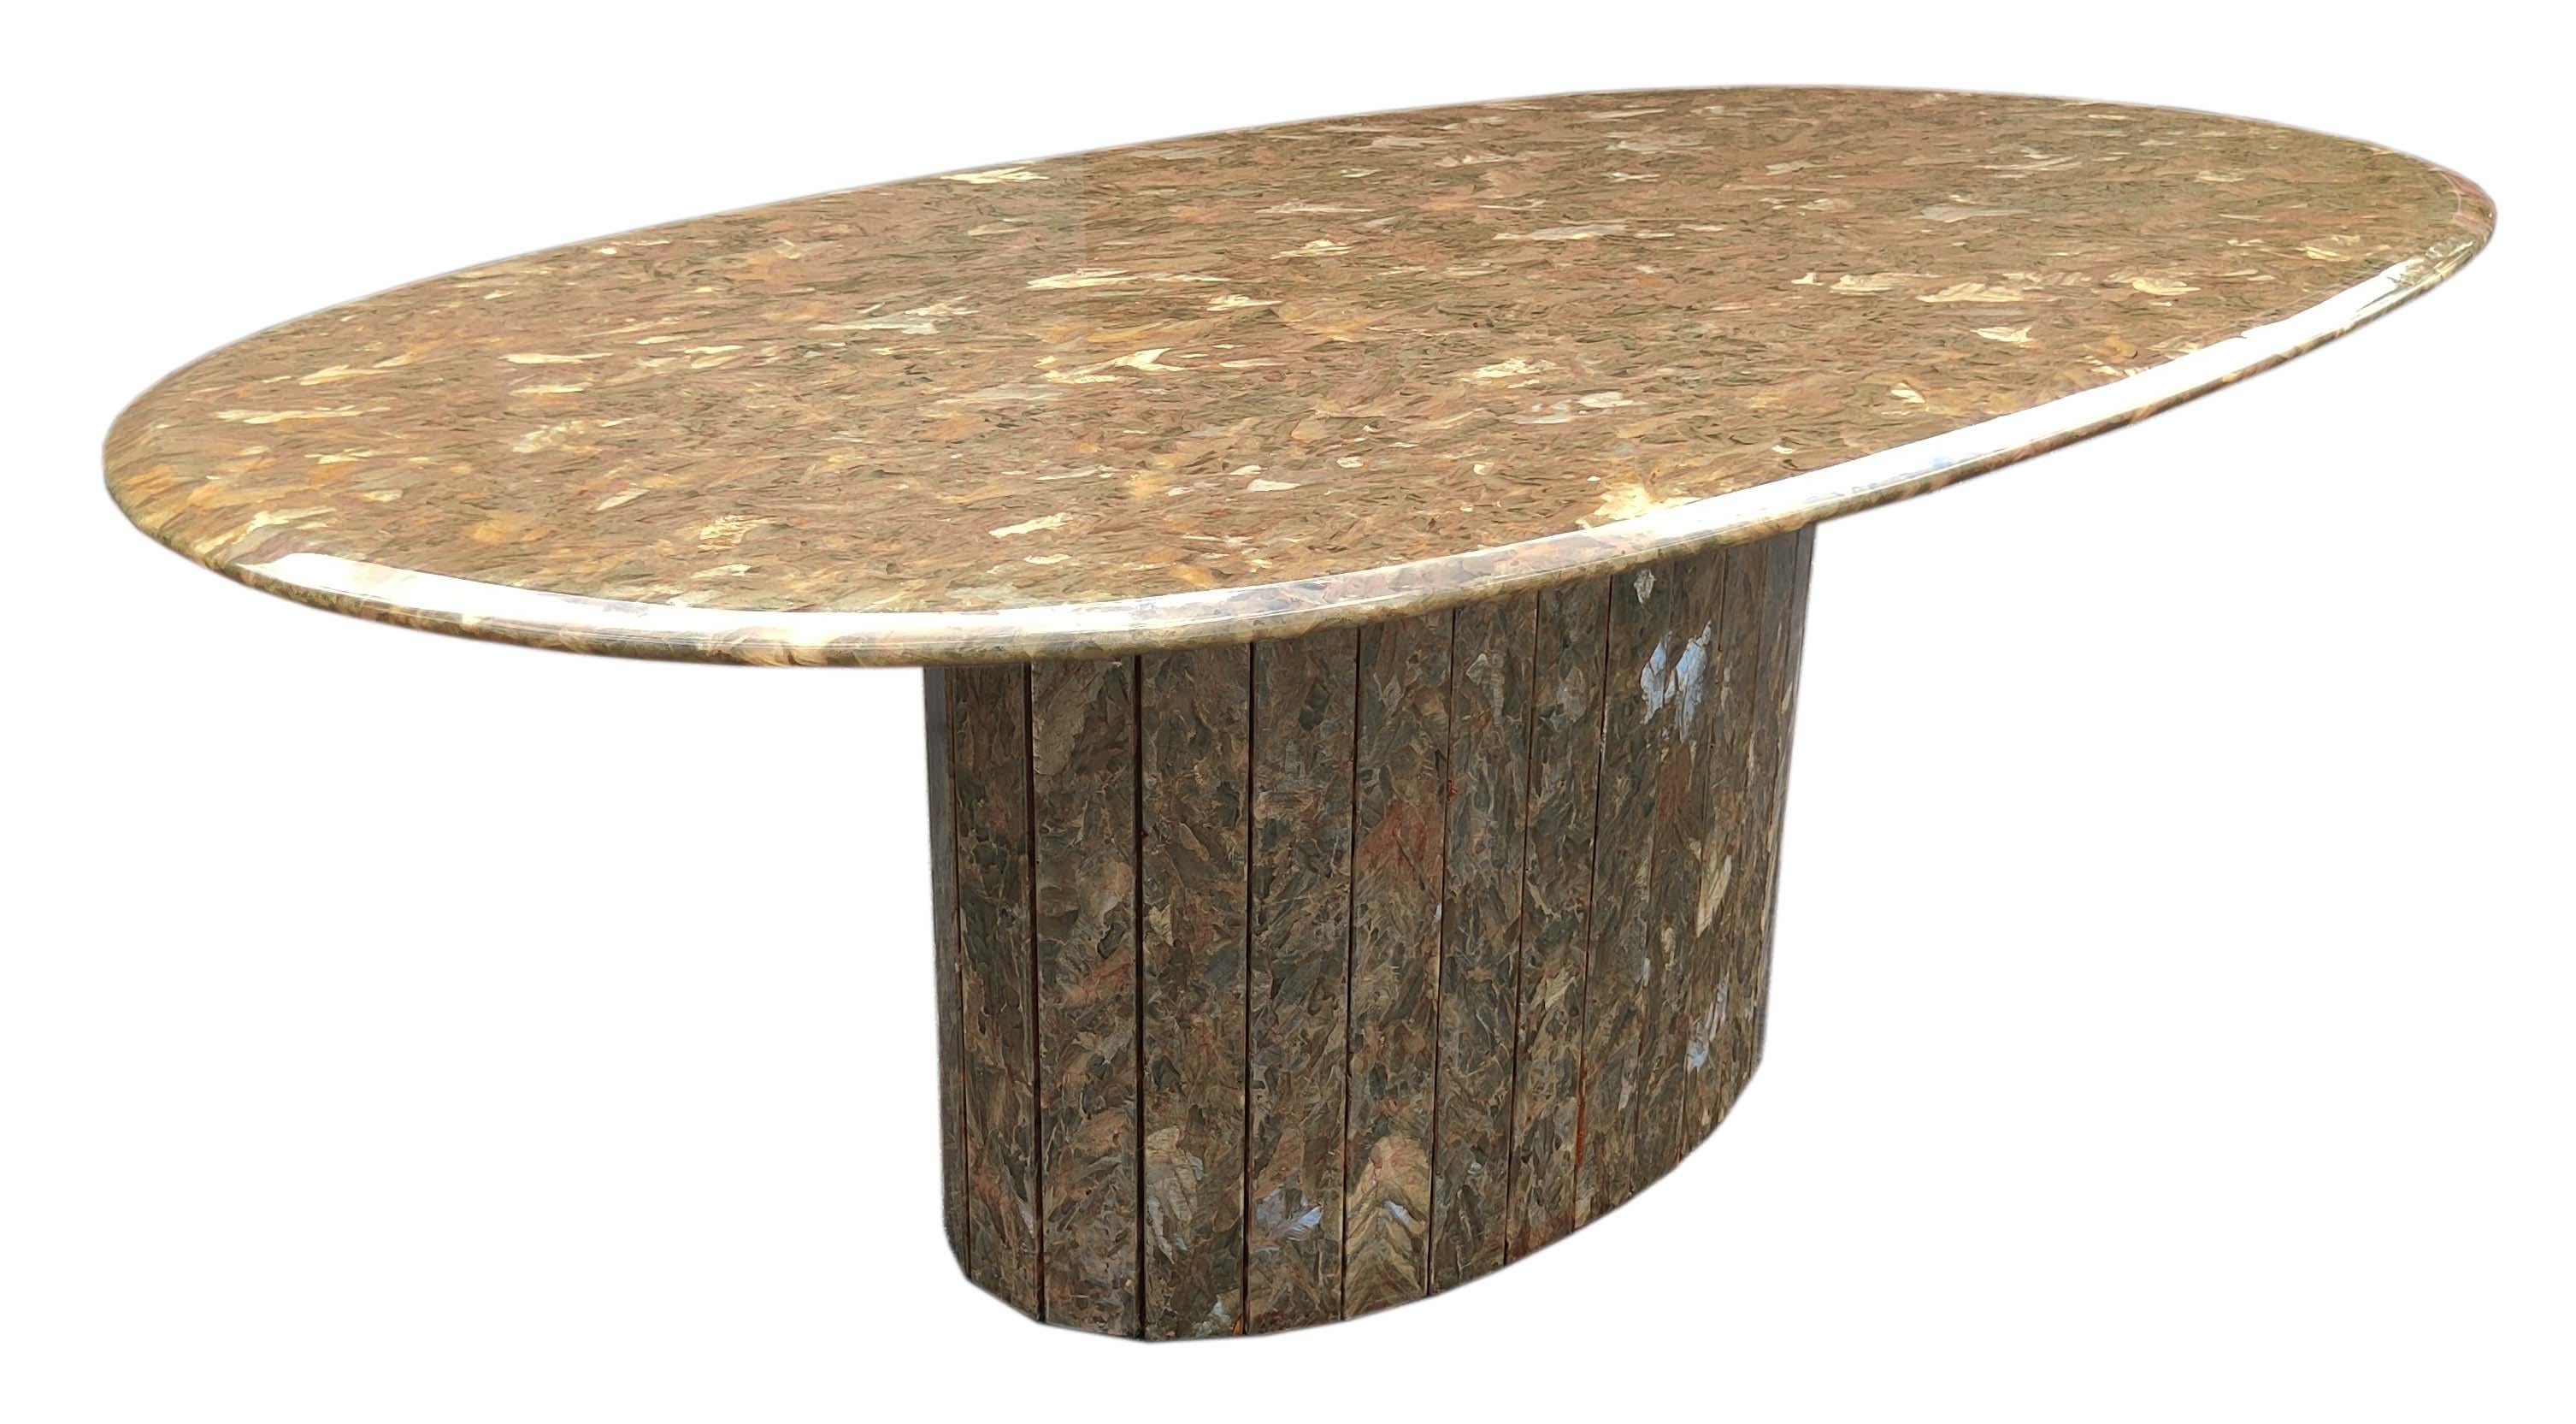 A rare marble table made of Alabaster-Crystal, with a thick, very durable and perfectly polished resign coating on the top and base. This large and super cool table easily seats 8 to ten guest at 78.75